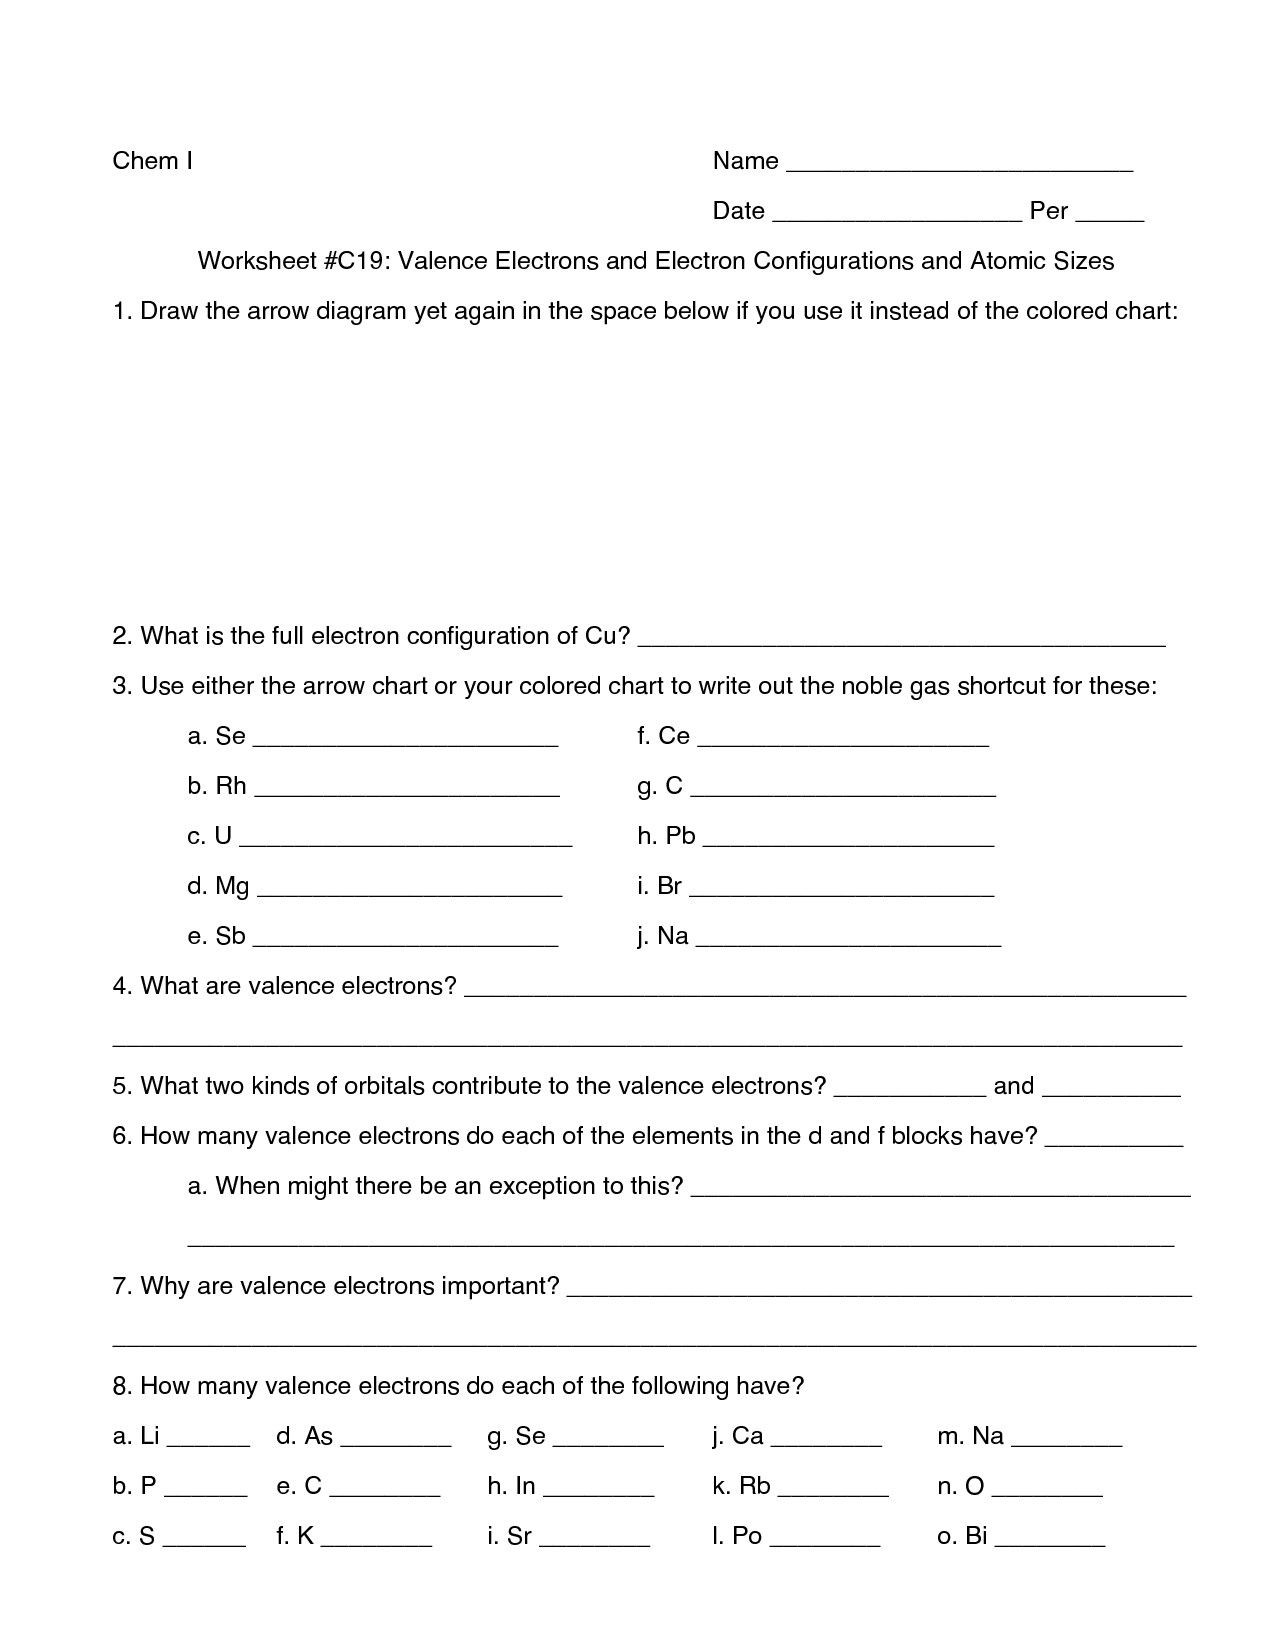 Valence Electrons Worksheet Answers Chemistry Worksheet Lewis Dot Structures Answer Key